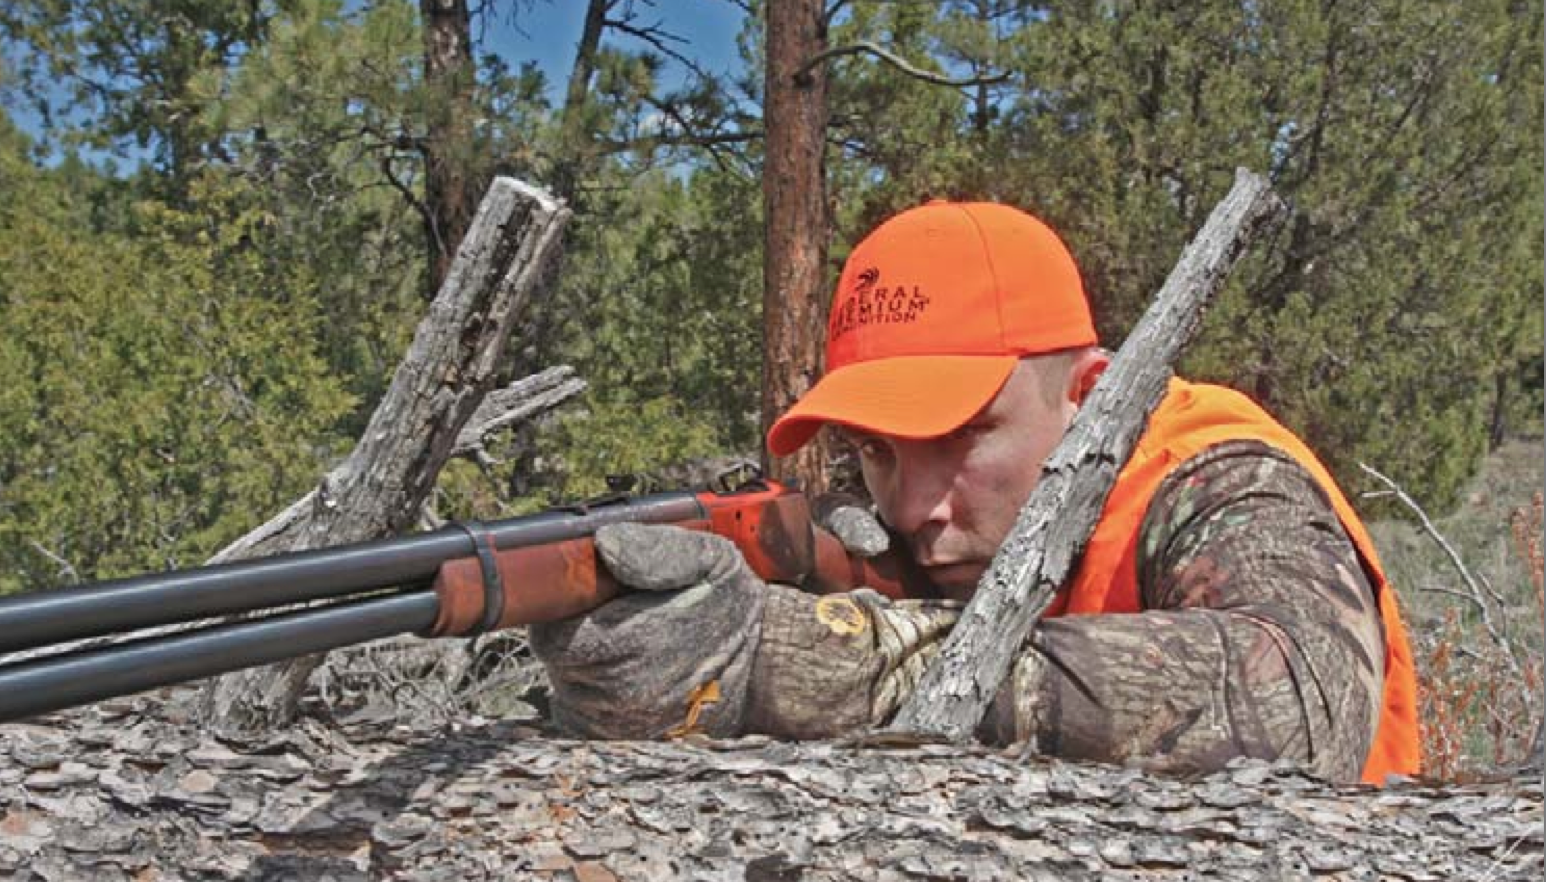 How to Pick the Best Deer Rifle for Your Type of Hunting